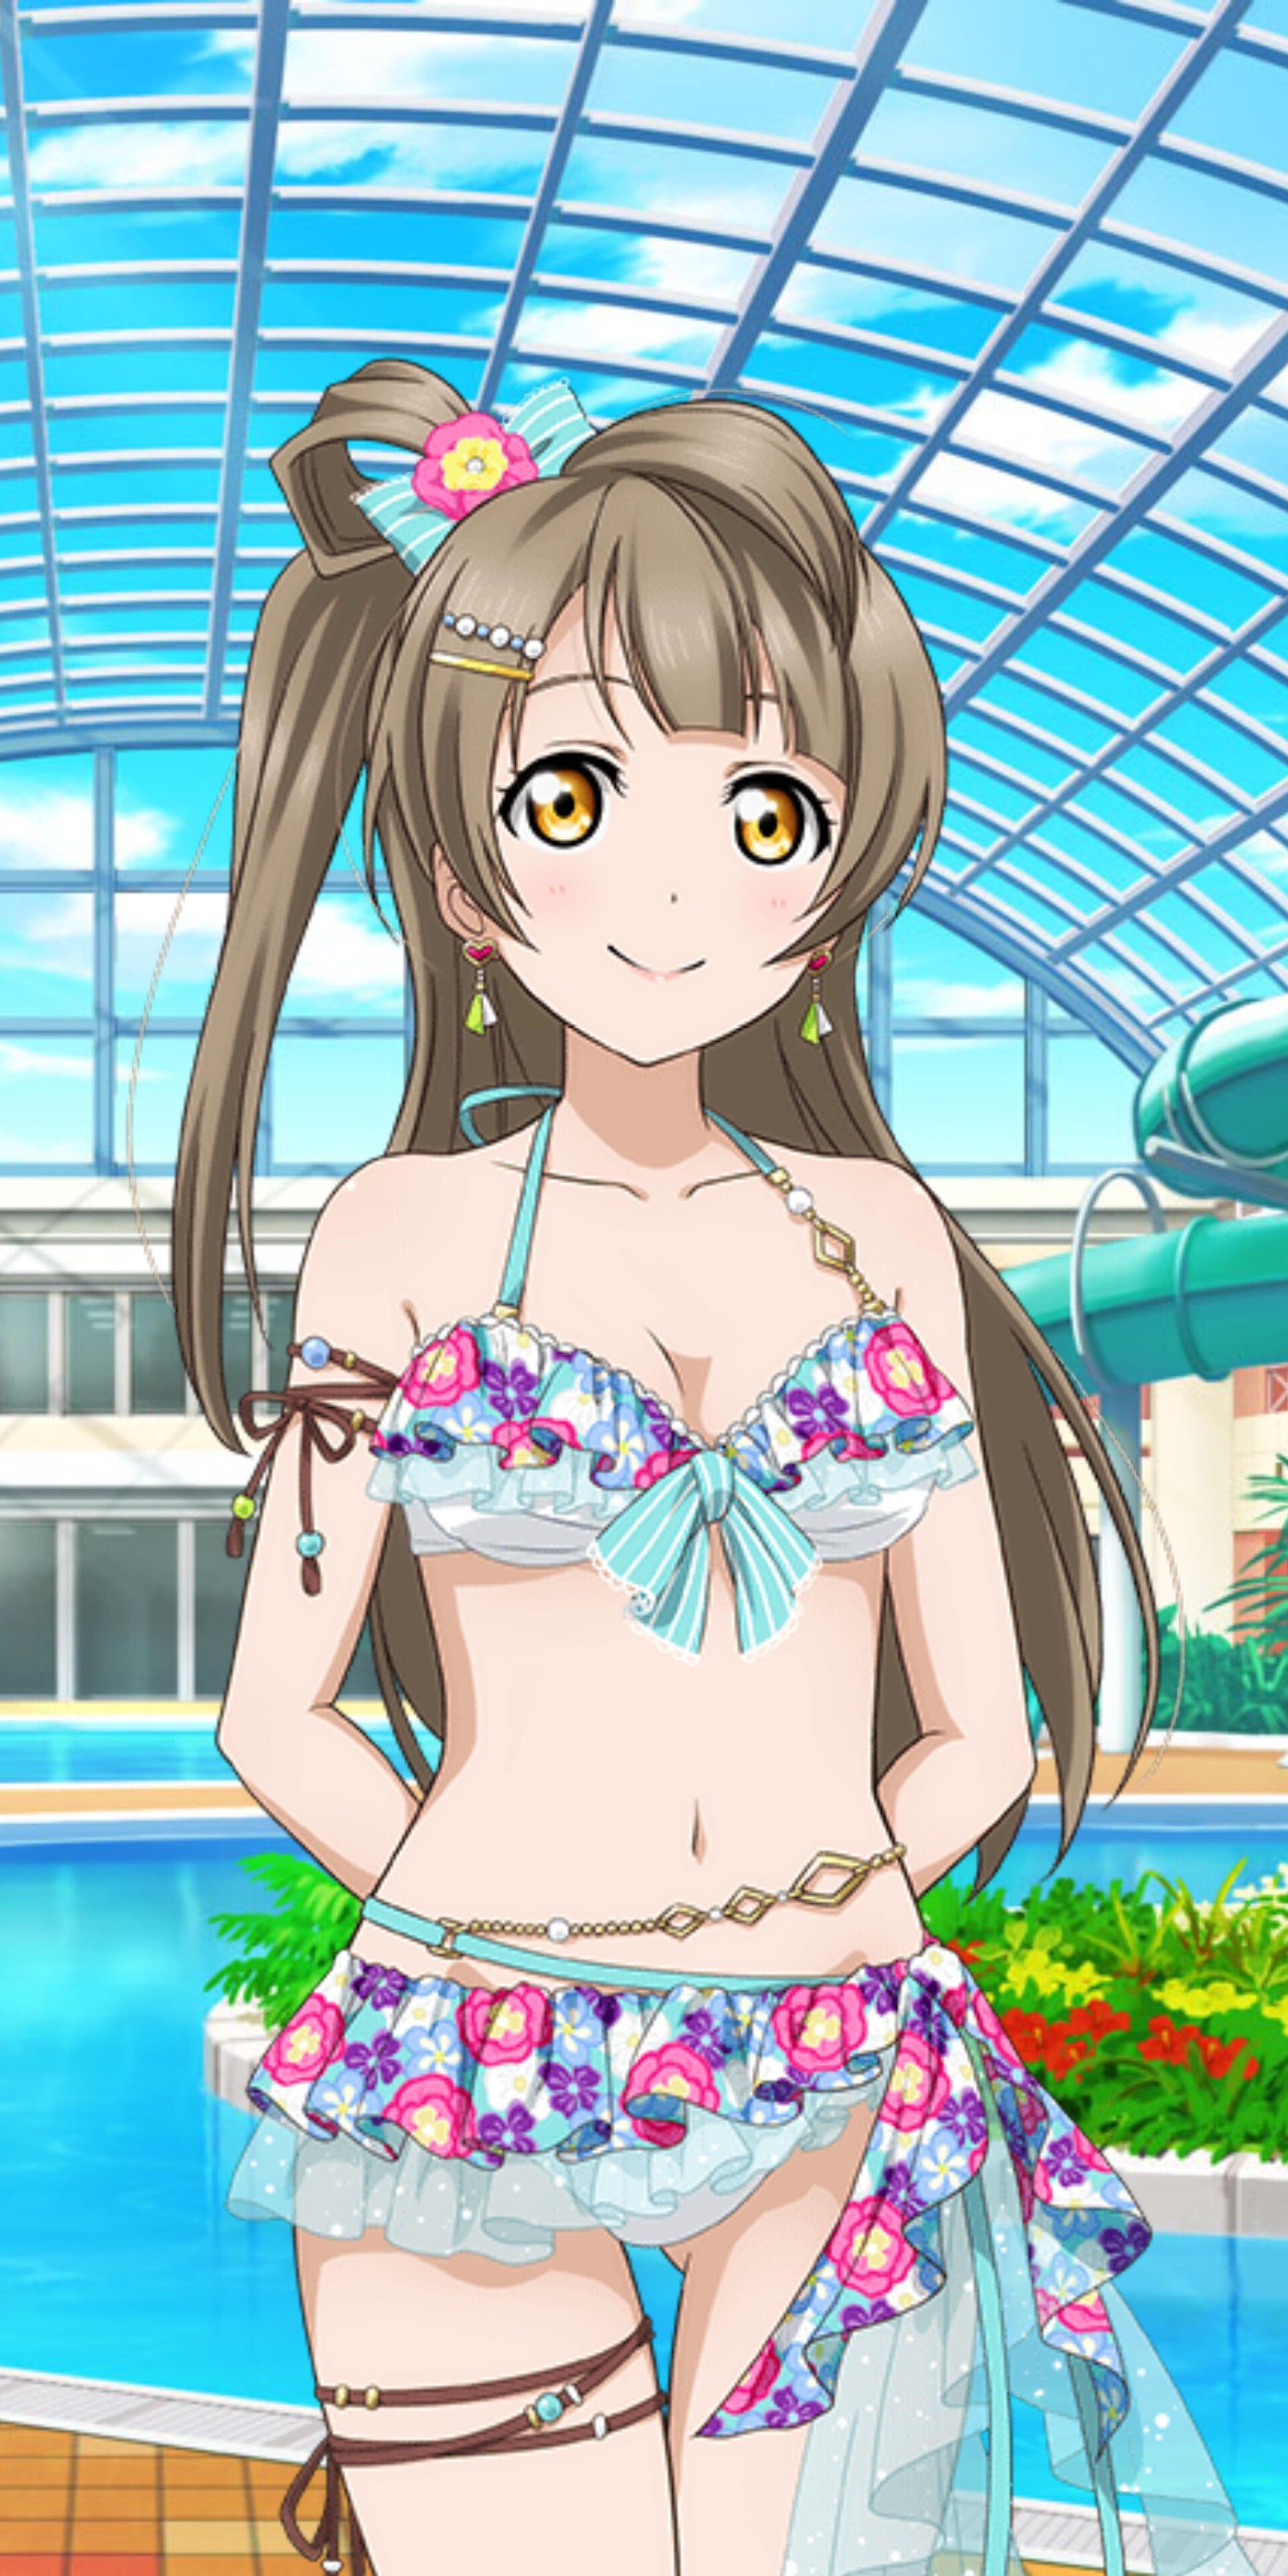 【With images】 The most erotic and syco character in the love live series wwwwwww 3